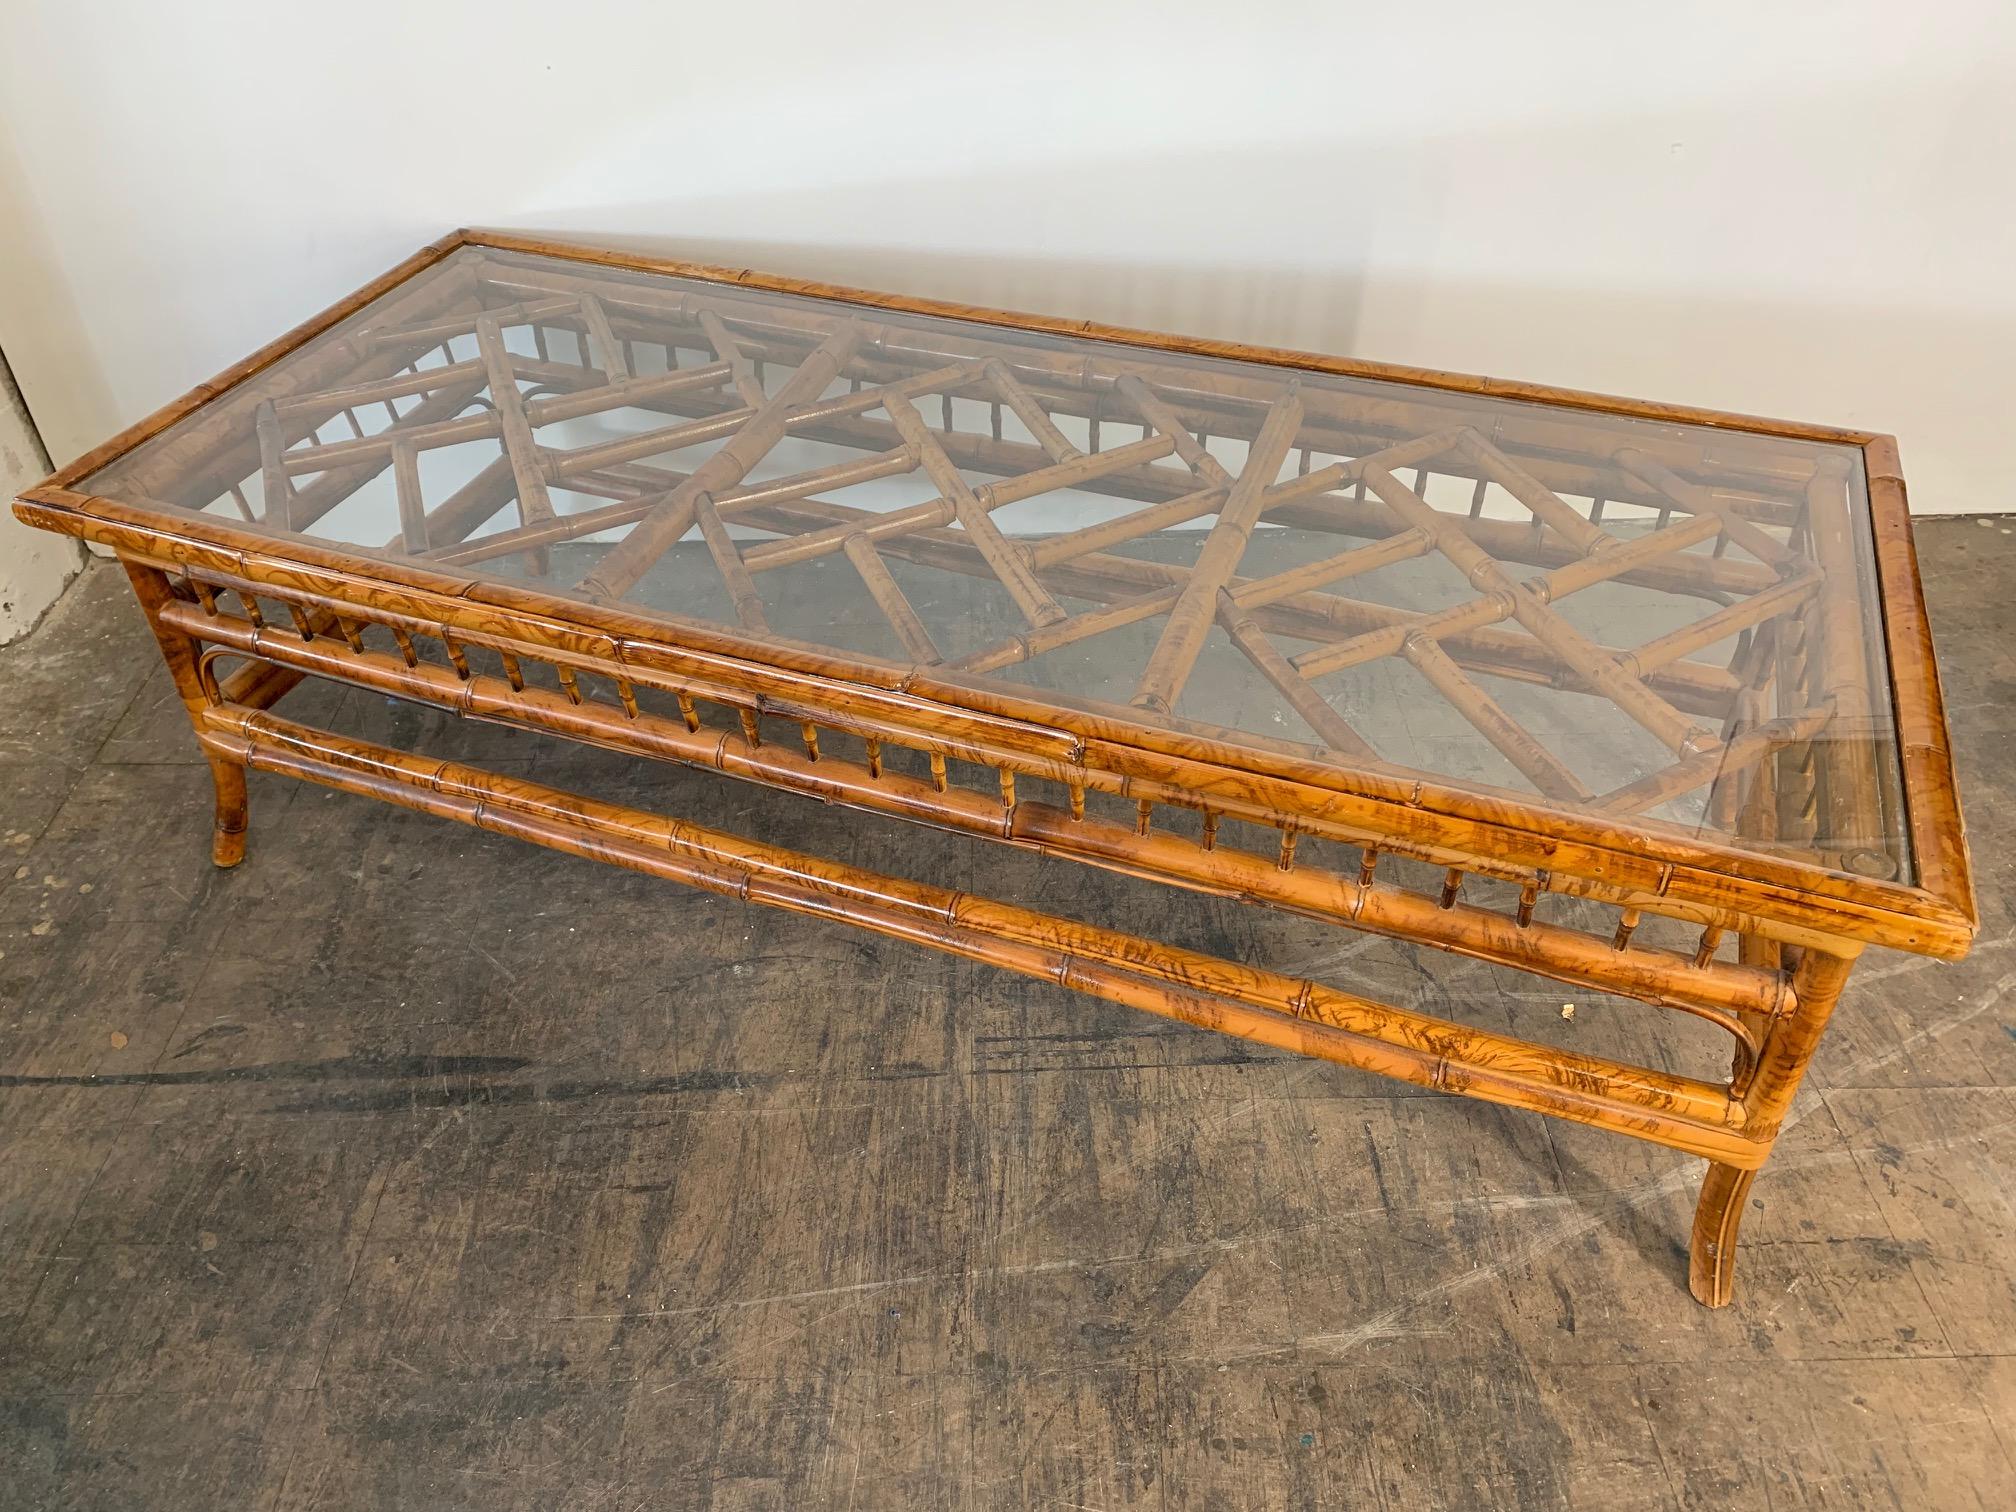 Asian chinoiserie style tiger bamboo coffee table with glass top. Very good vintage condition.